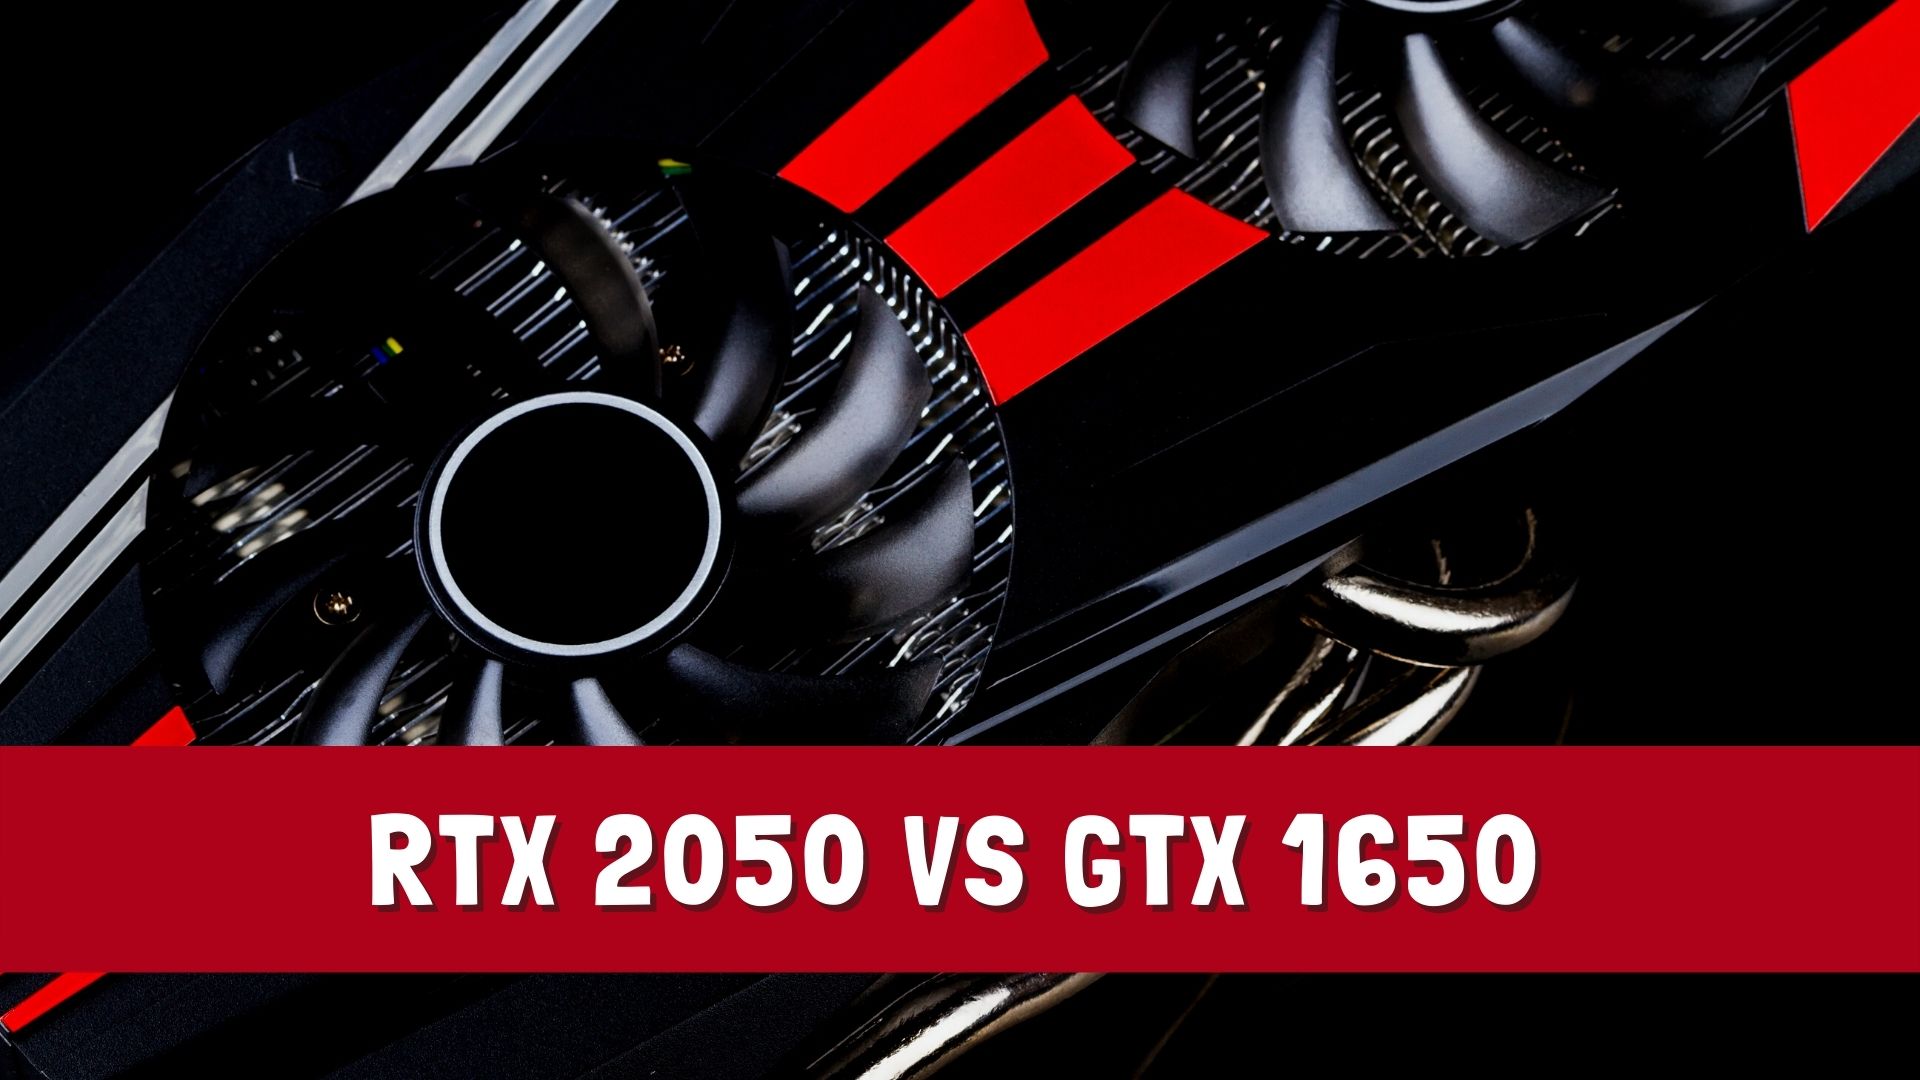 Nvidia RTX 2050 Vs GTX 1650: Which is Better?